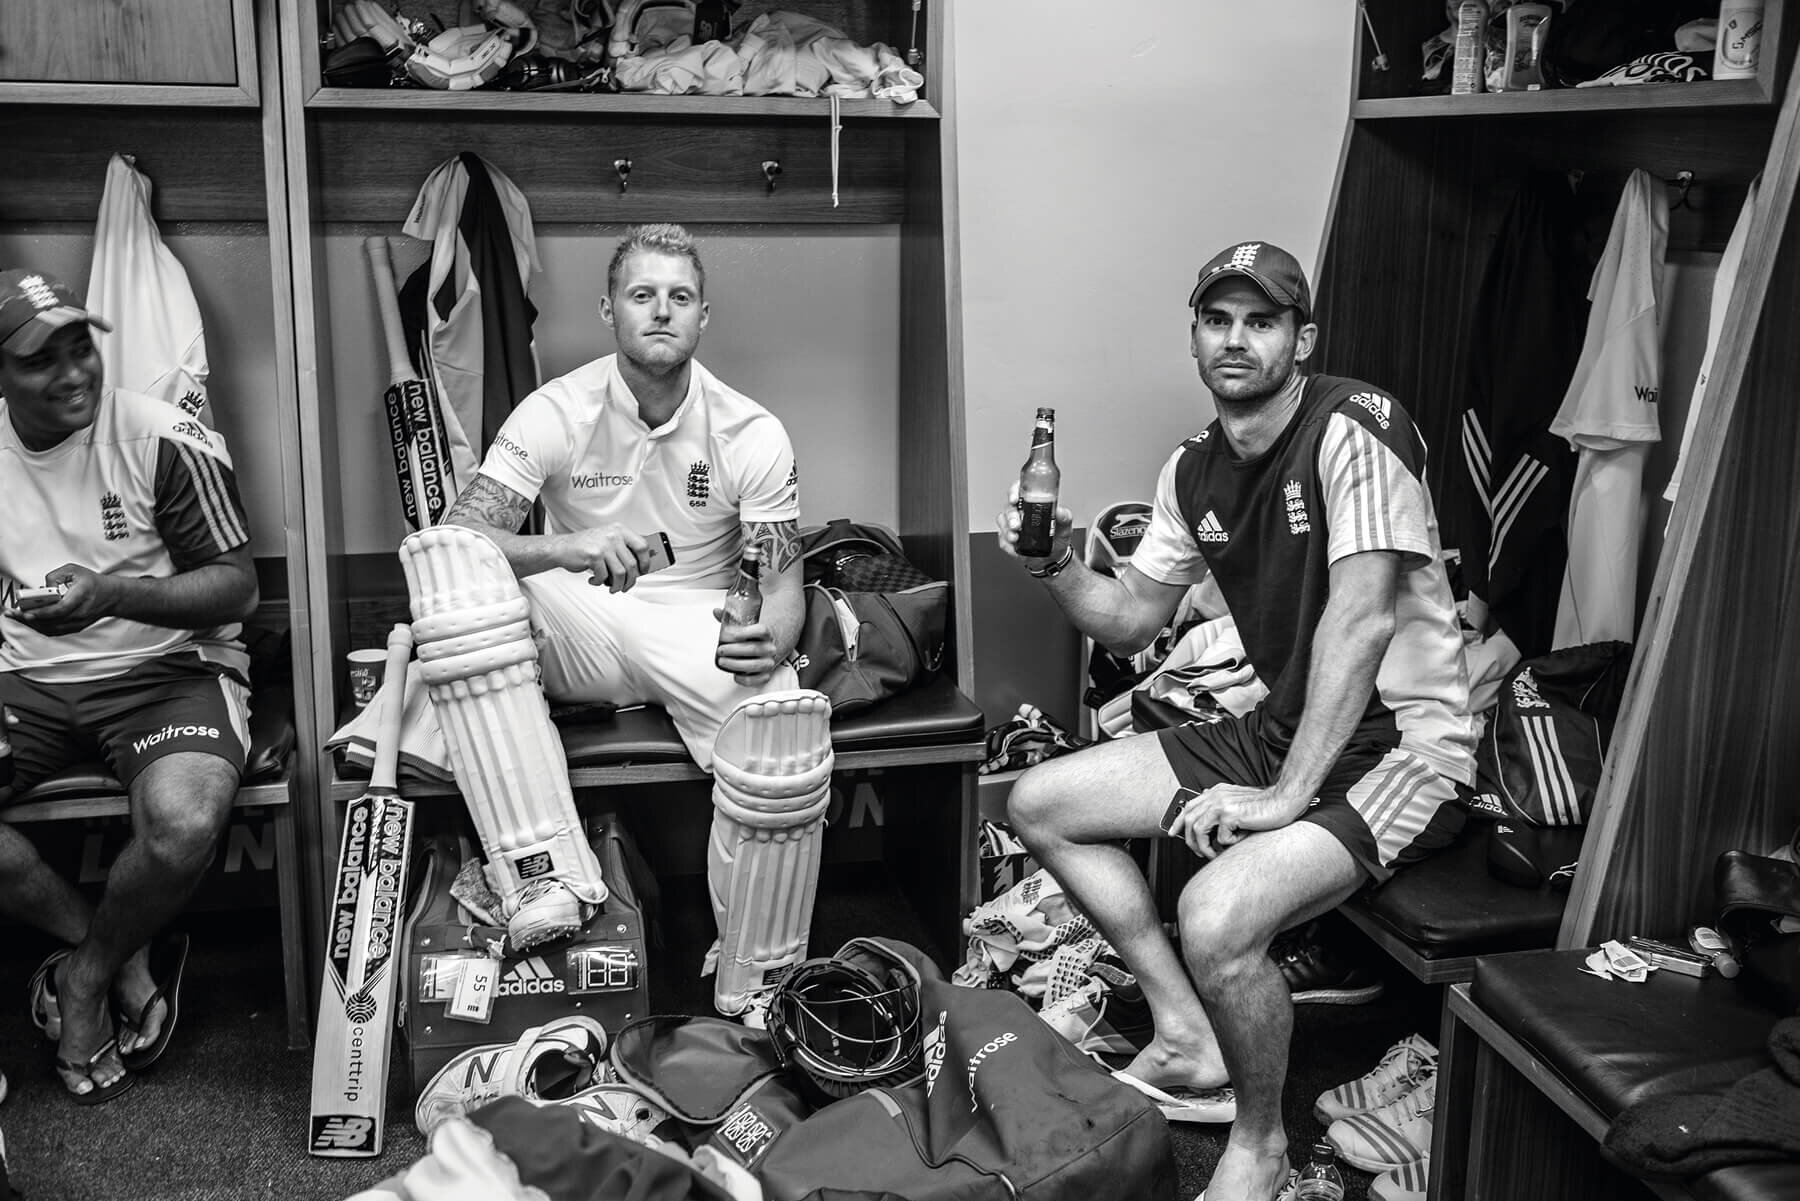 cricket_bw_collection_2.jpg